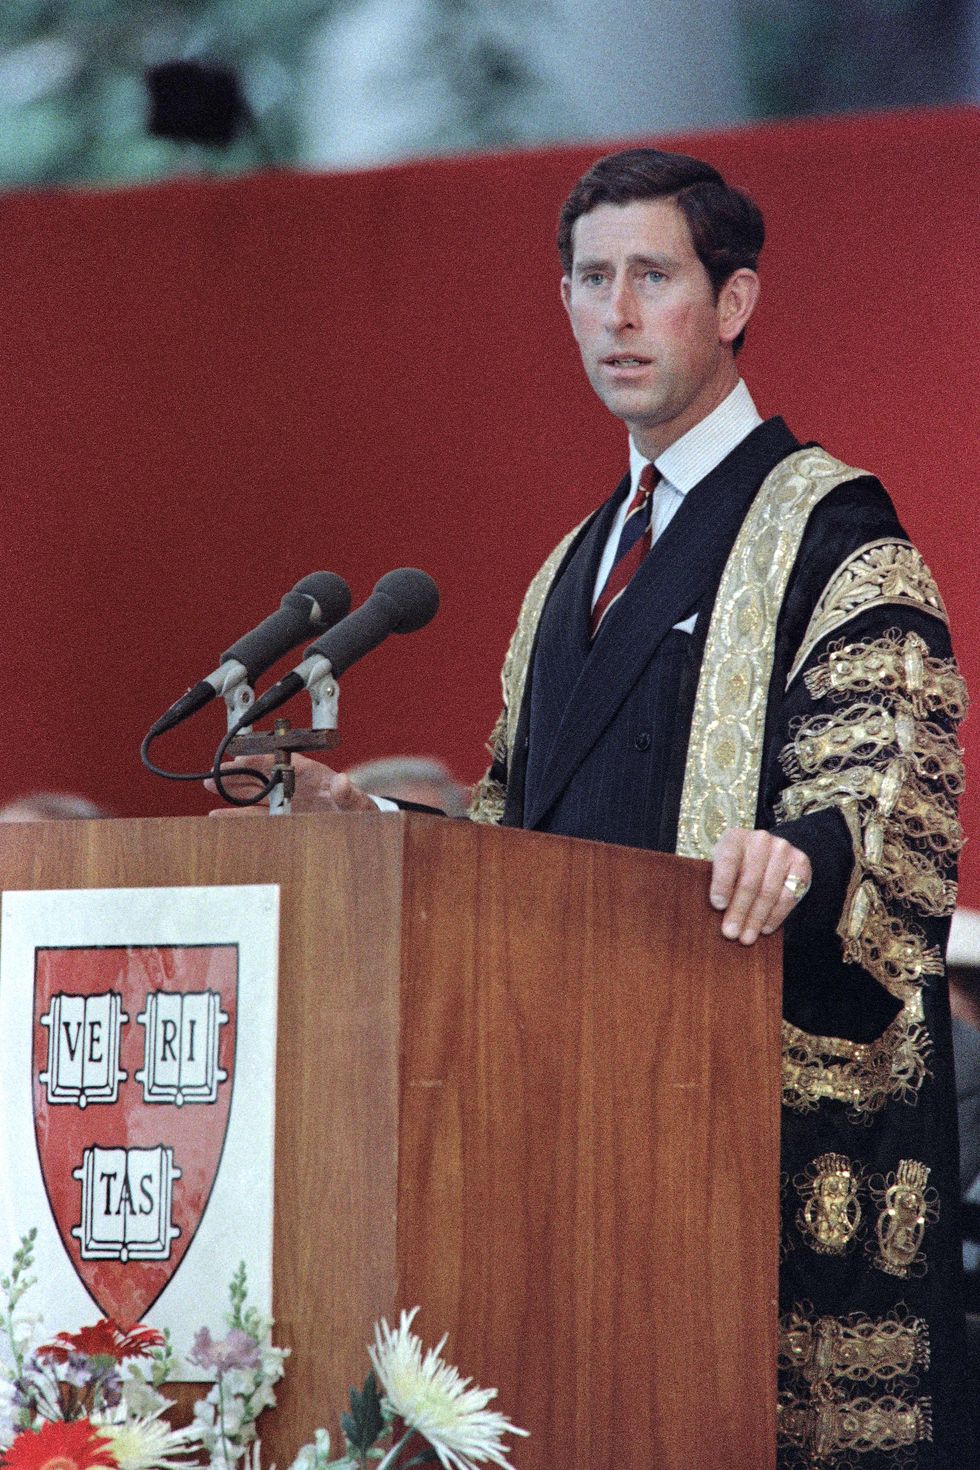 britains prince charles, charles of wales, wearing the academical dress, adresses the convocation for the harvard universitys 350th birthday celebration in cambridge, on september 4, 1986, in the massachusetts photo by mike maloney  afp photo by mike maloneyafp via getty images